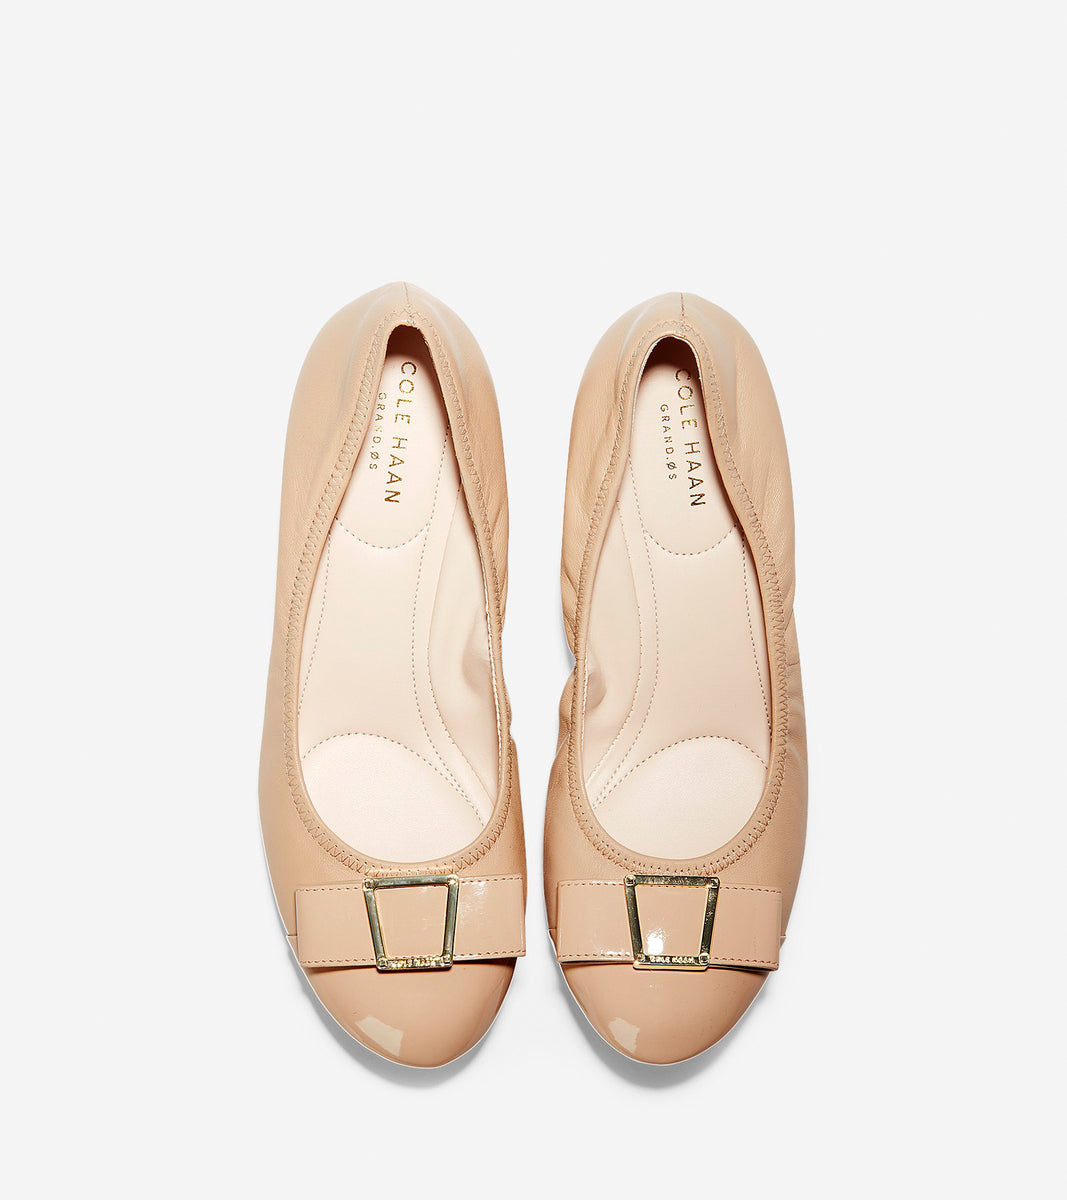 ColeHaan-Emory Bow Wedge-w09951-Nude Leather